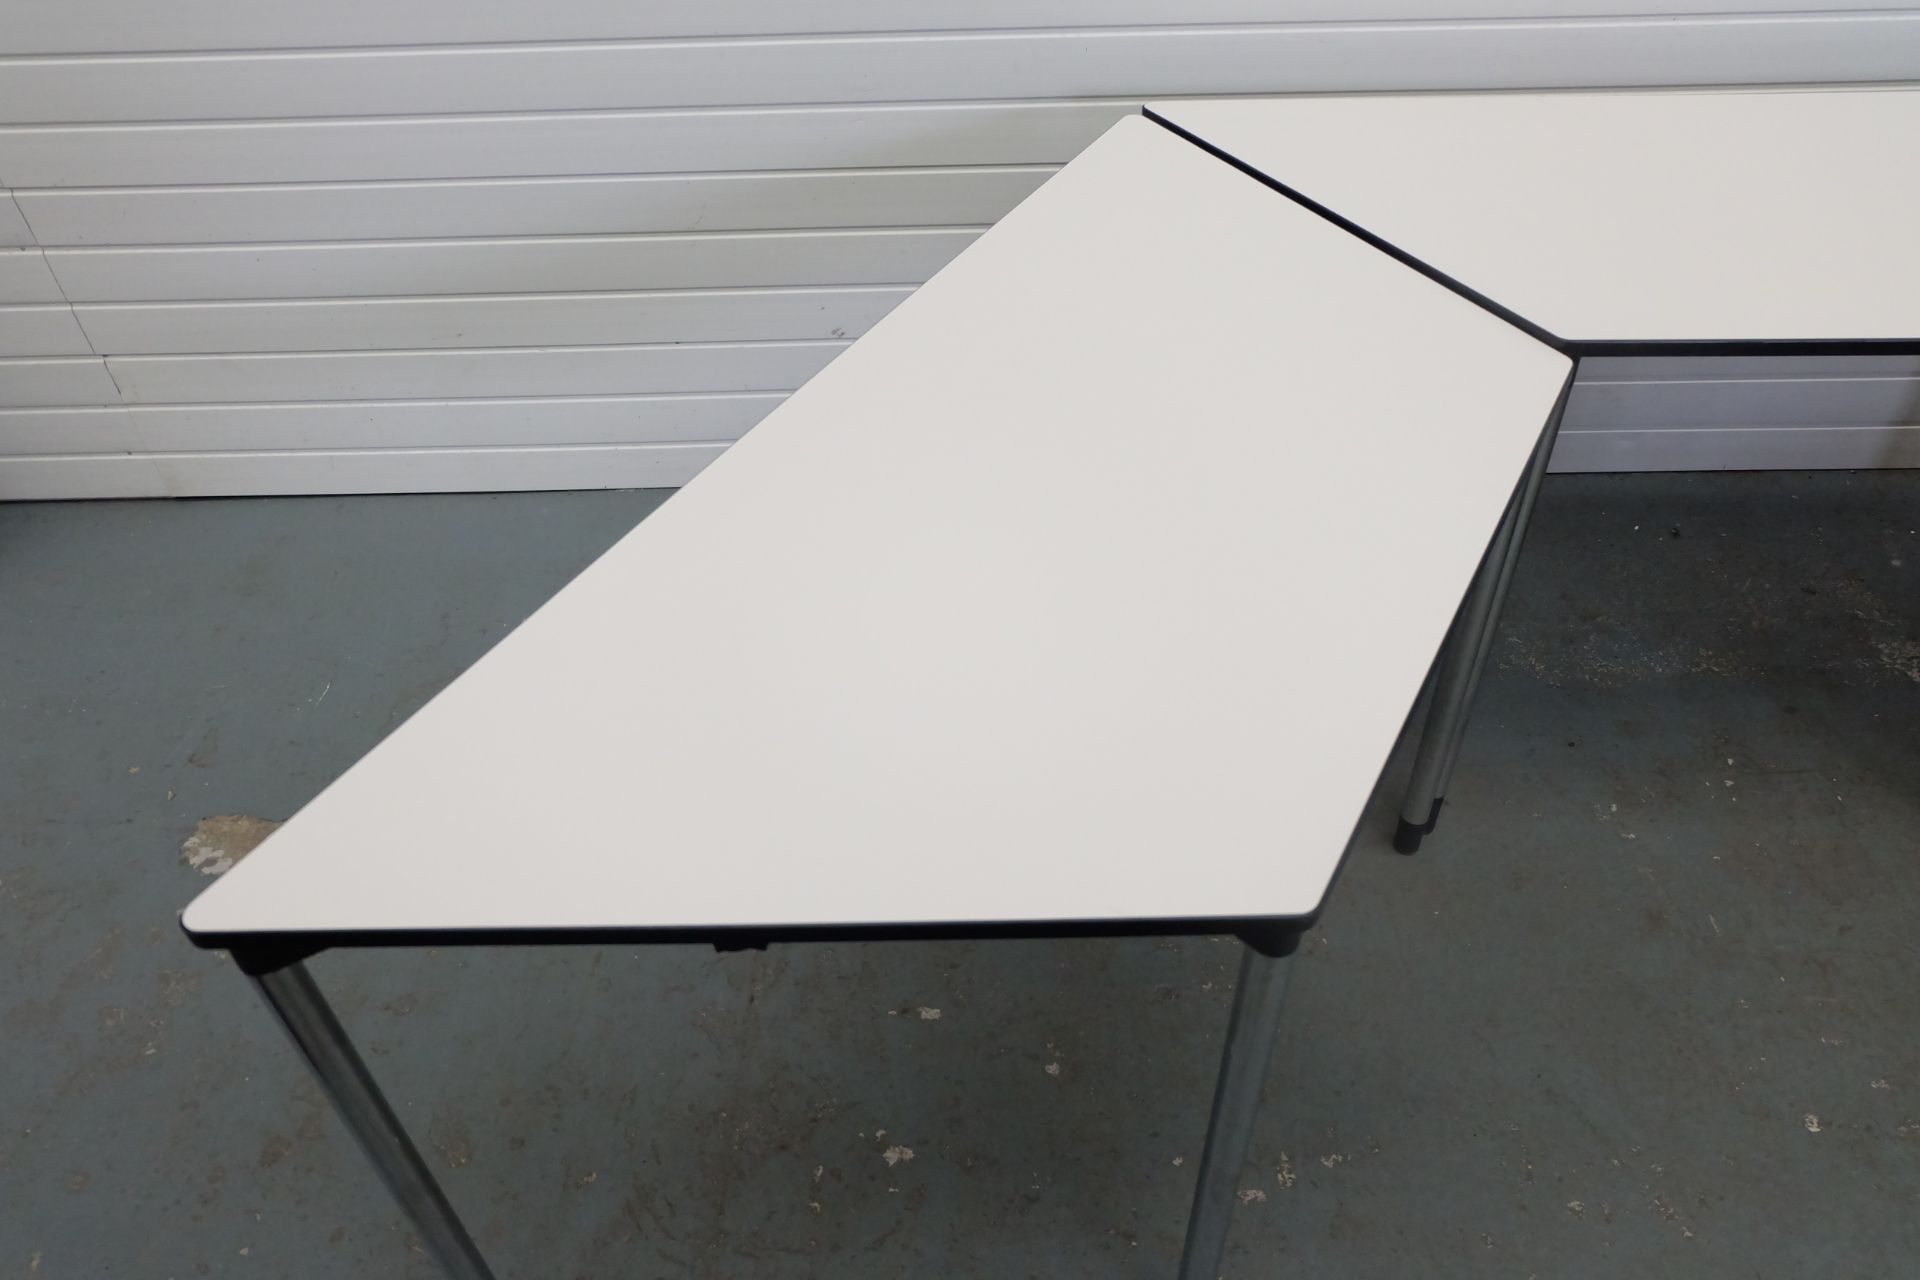 3 x Trapeziod Shape Desks With Metal Legs. Size 1470mm x 650mm x 750mm High. - Image 2 of 4